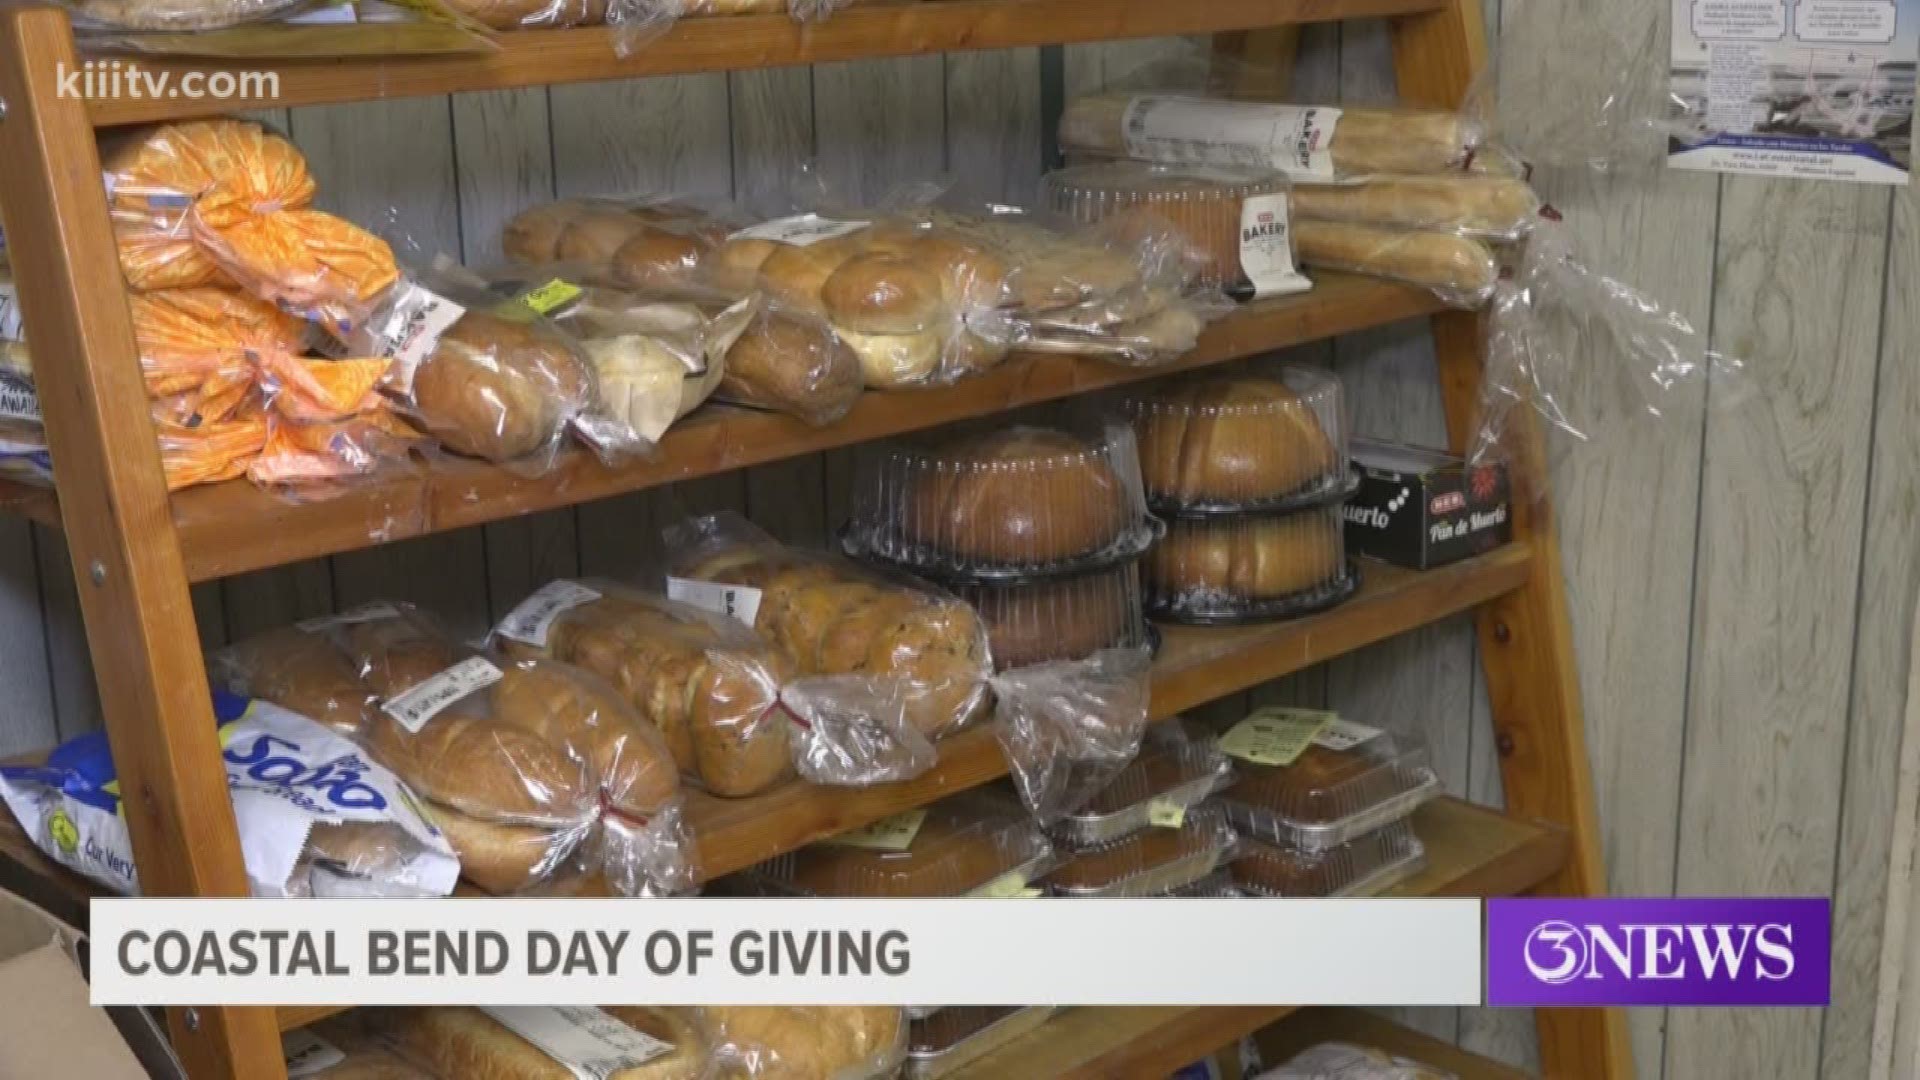 During last year's Coastal Bend Day of Giving, KIII-TV helped the Coastal Bend Community Foundation raise more than $2.5 million.